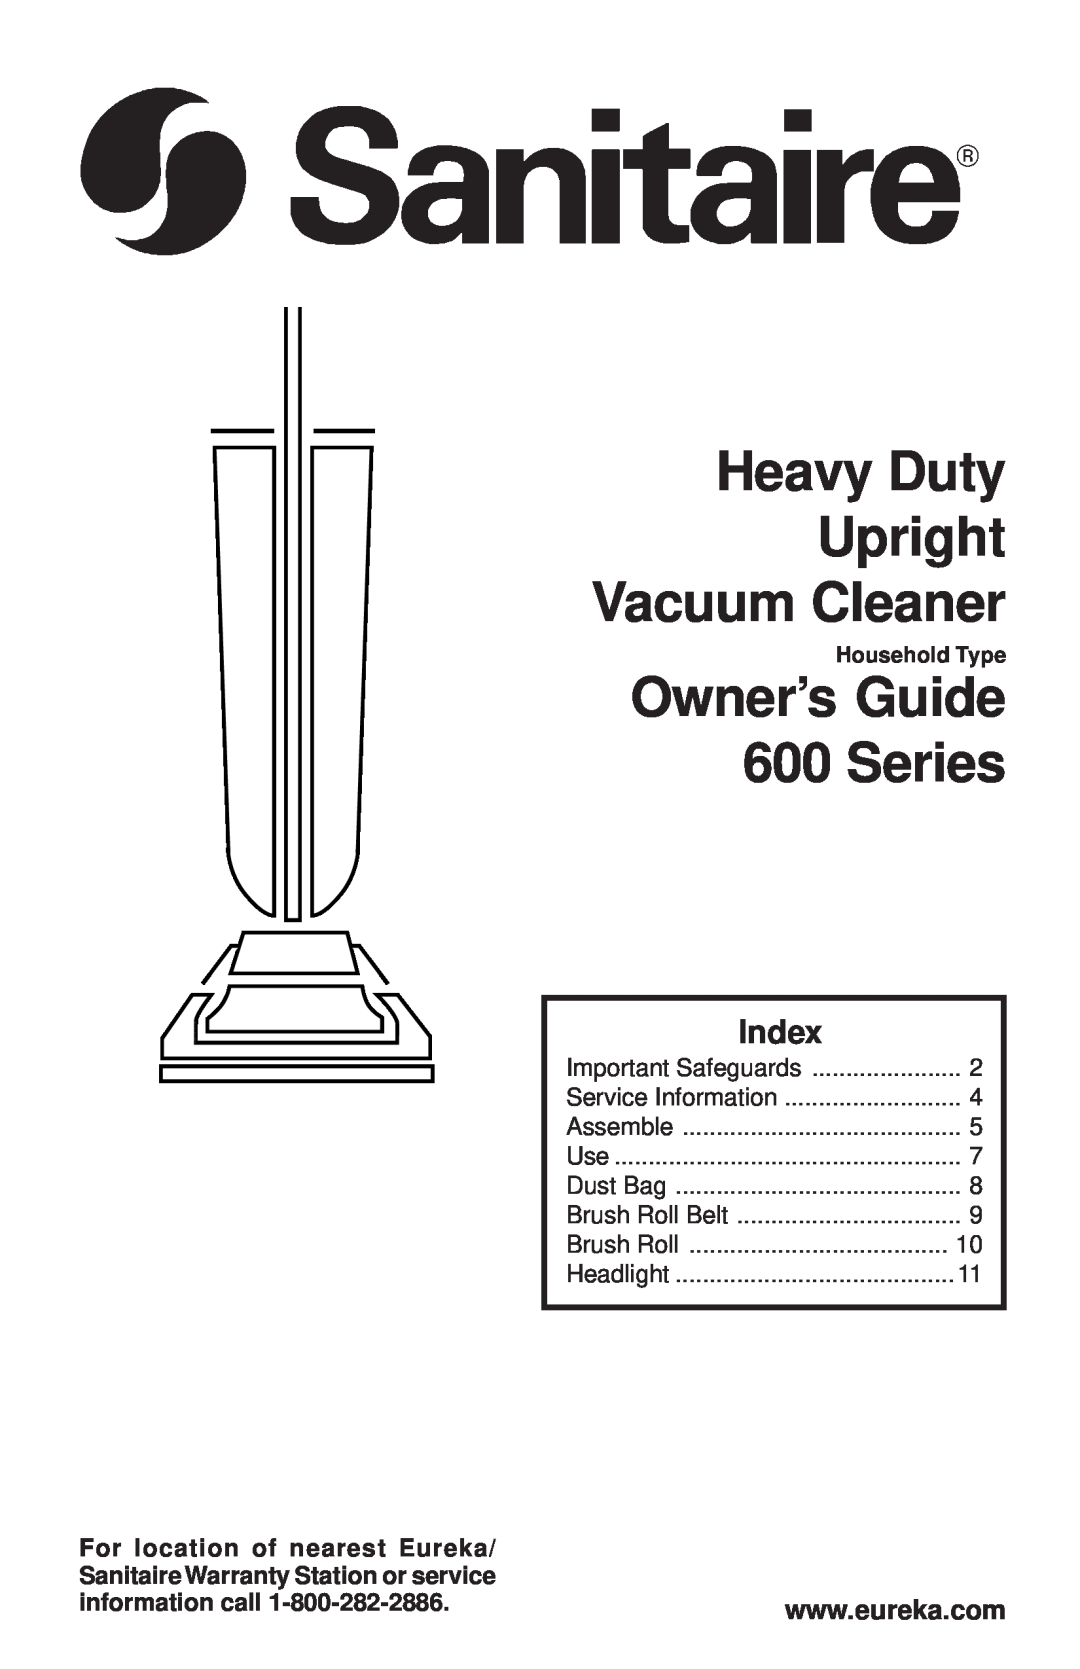 Sanitaire warranty Heavy Duty Upright Vacuum Cleaner, Index, Owner’s Guide 600 Series 